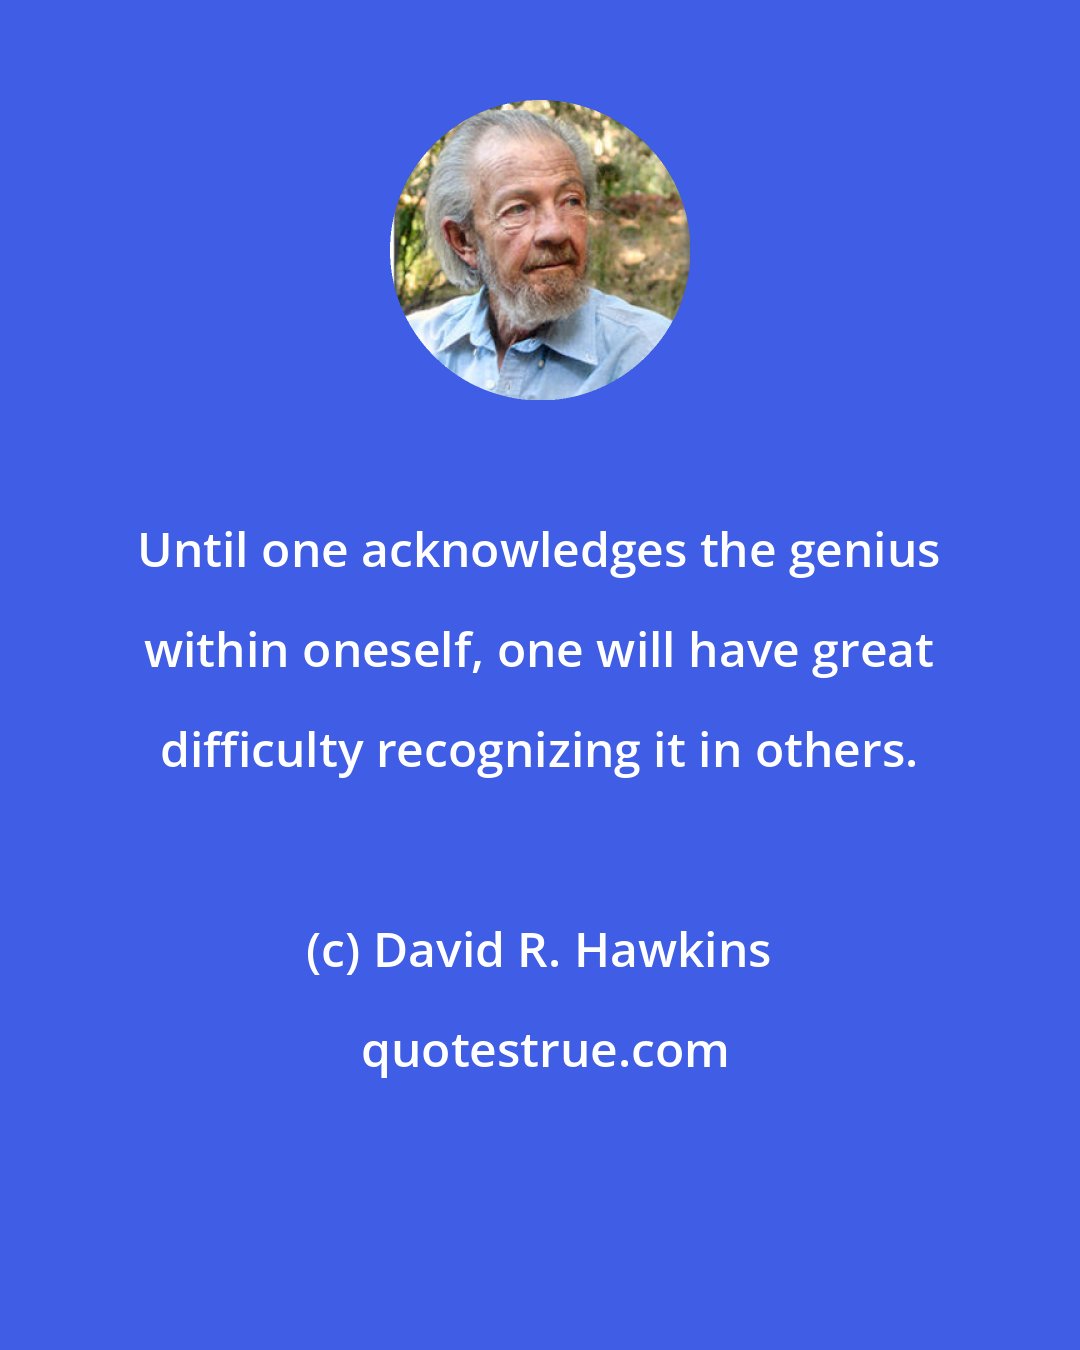 David R. Hawkins: Until one acknowledges the genius within oneself, one will have great difficulty recognizing it in others.